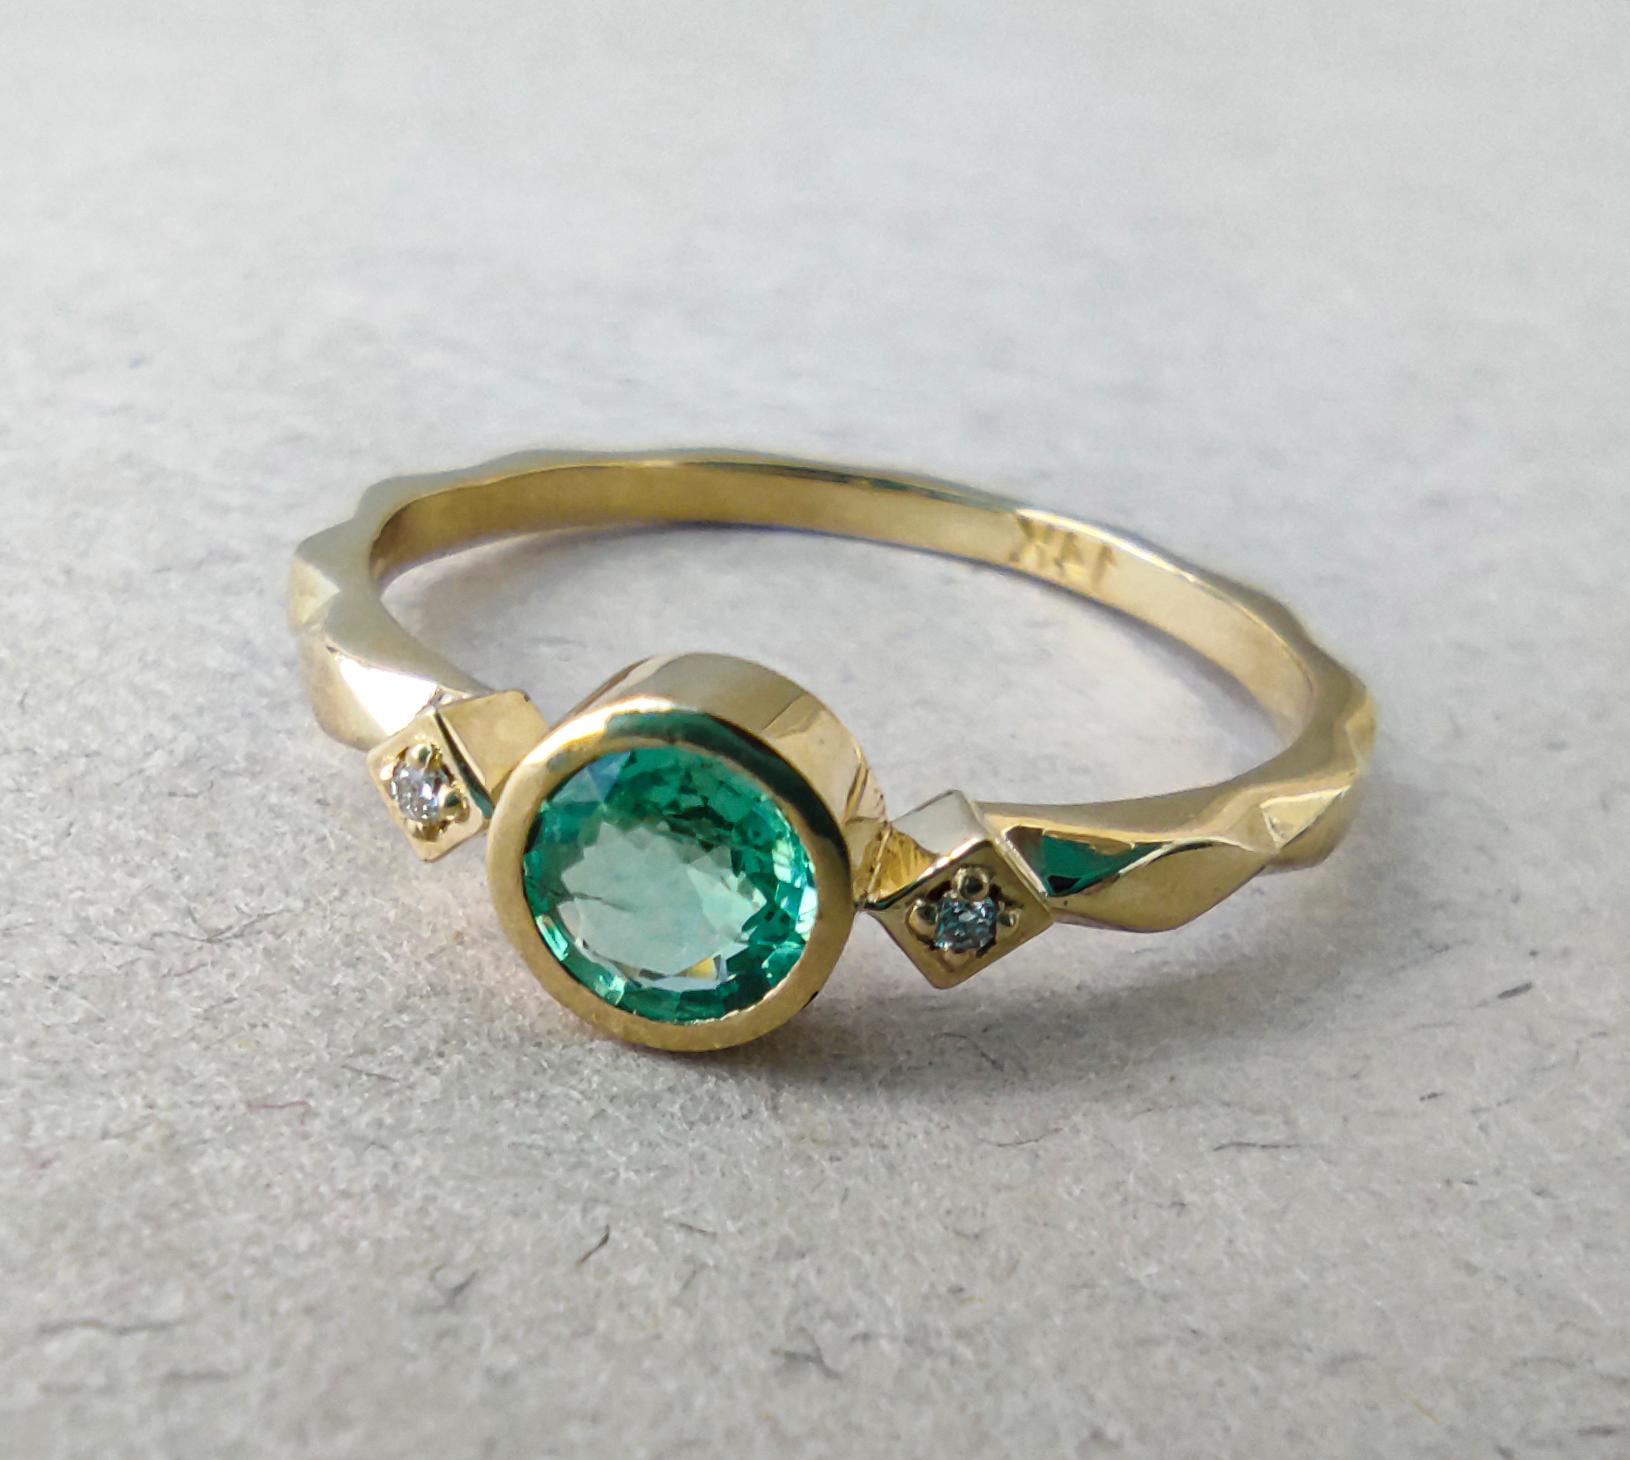 For Sale:  Round Emerald Ring in 14k Gold, Genuine Emerald Ring 4